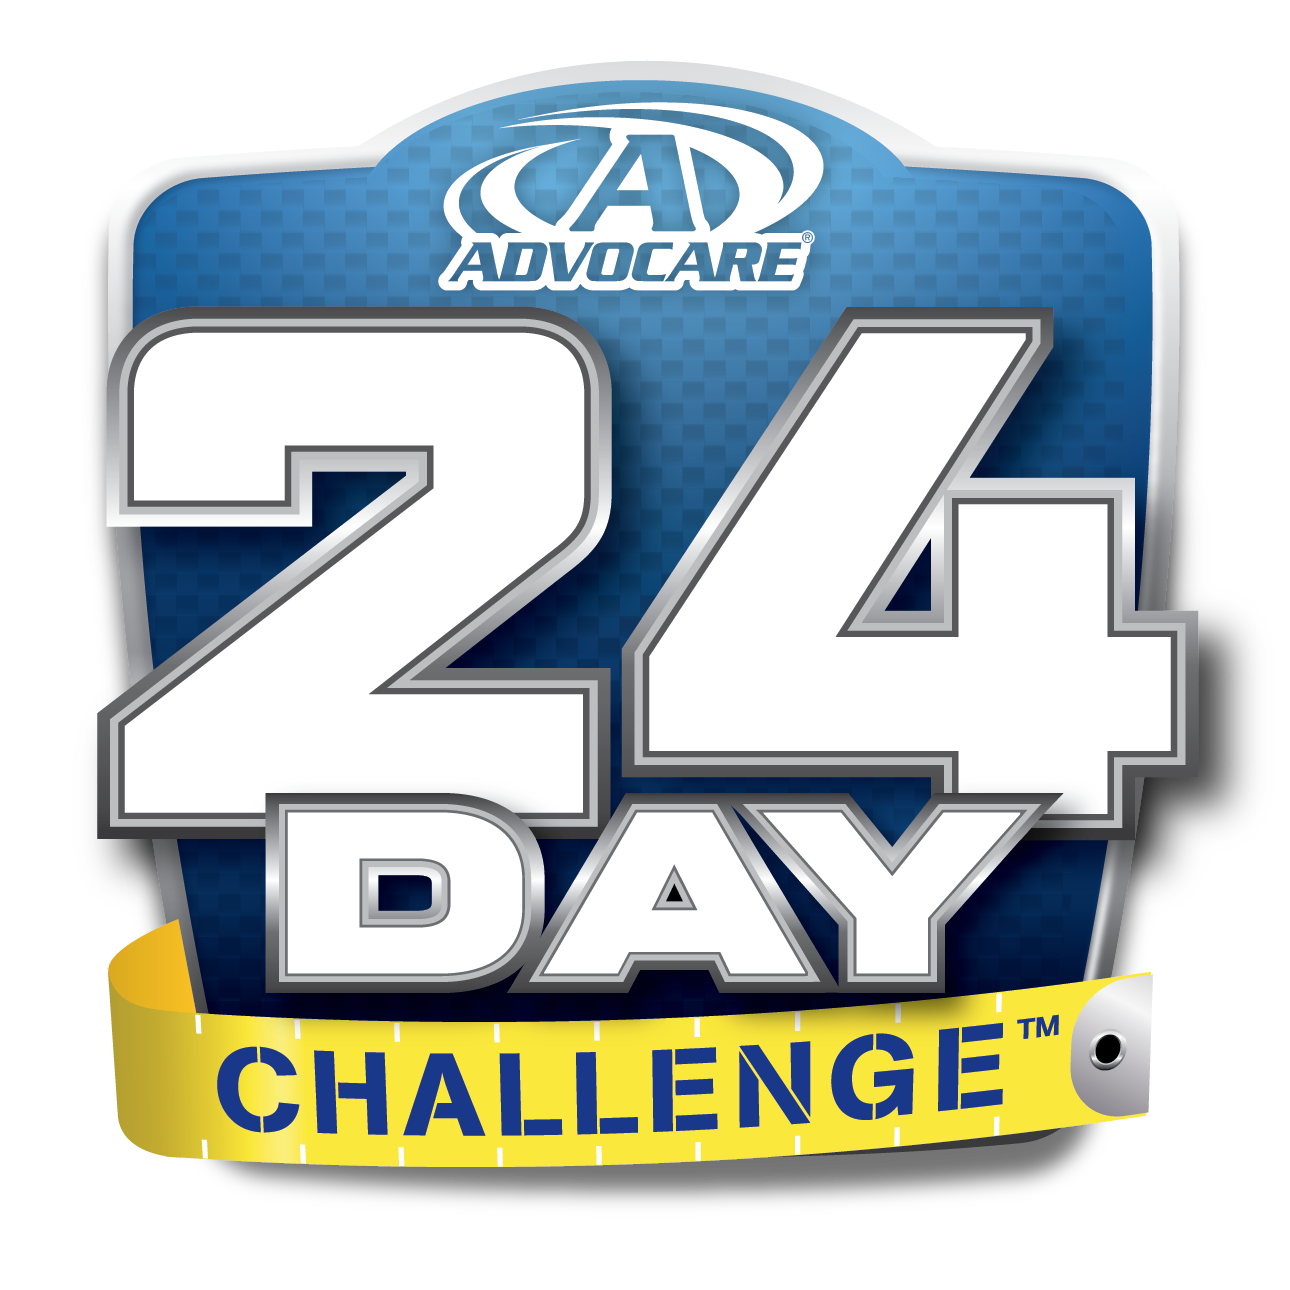 Business Builder / Independent Distributor of ADVOCARE products SPARK & 24 – Day challenge. check out https://t.co/AxggNNP98Q @hottopicdecals